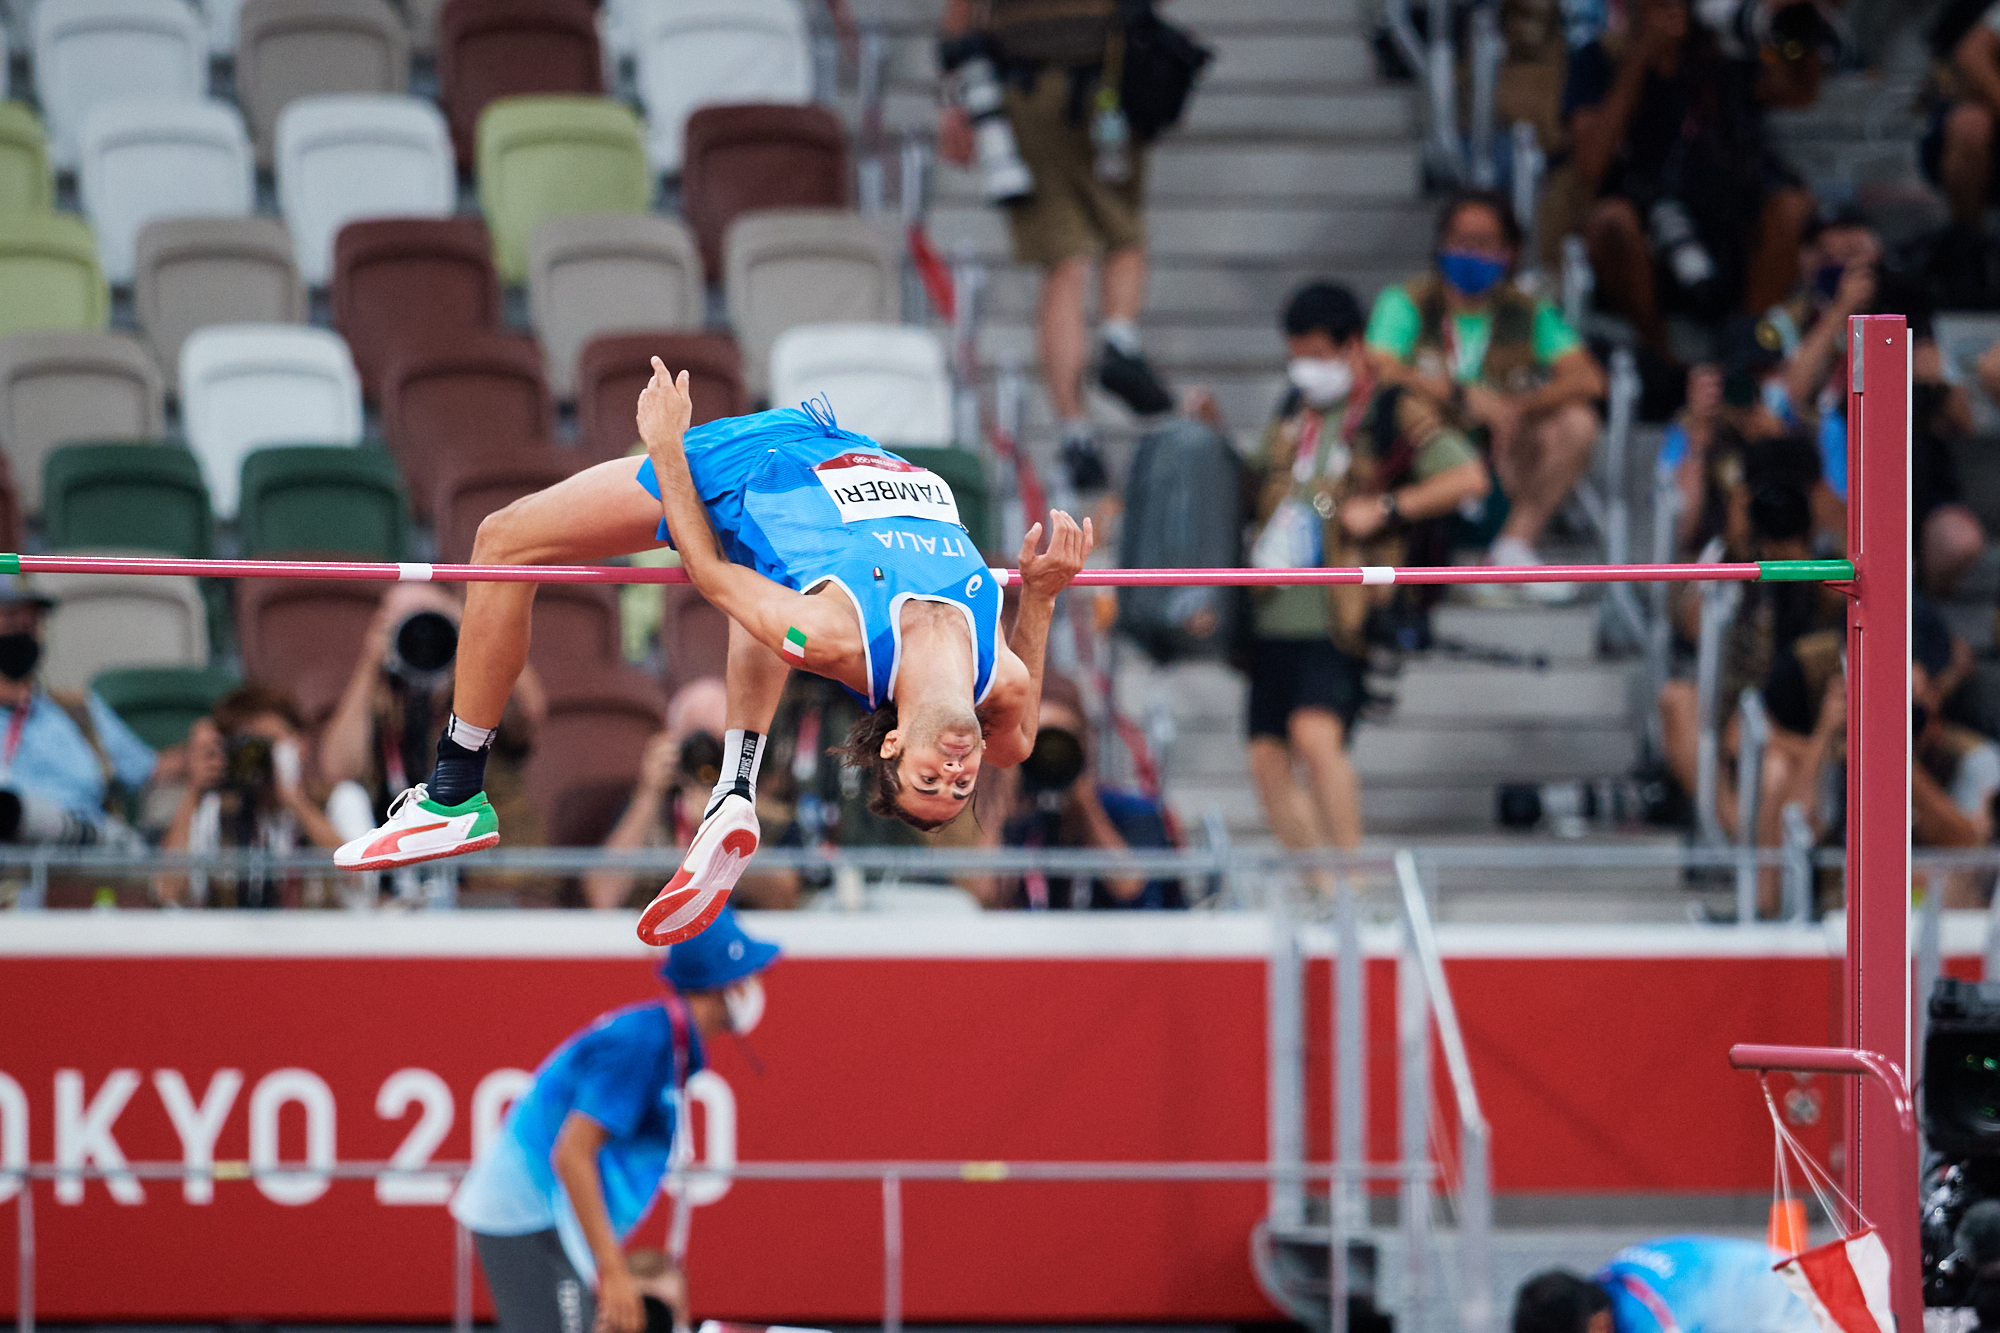 Photo of Gianmarco Tamberi during high jump qualifications at the 2020 Tokyo Olympics in the Olympic Stadium in Tokyo, Japan.